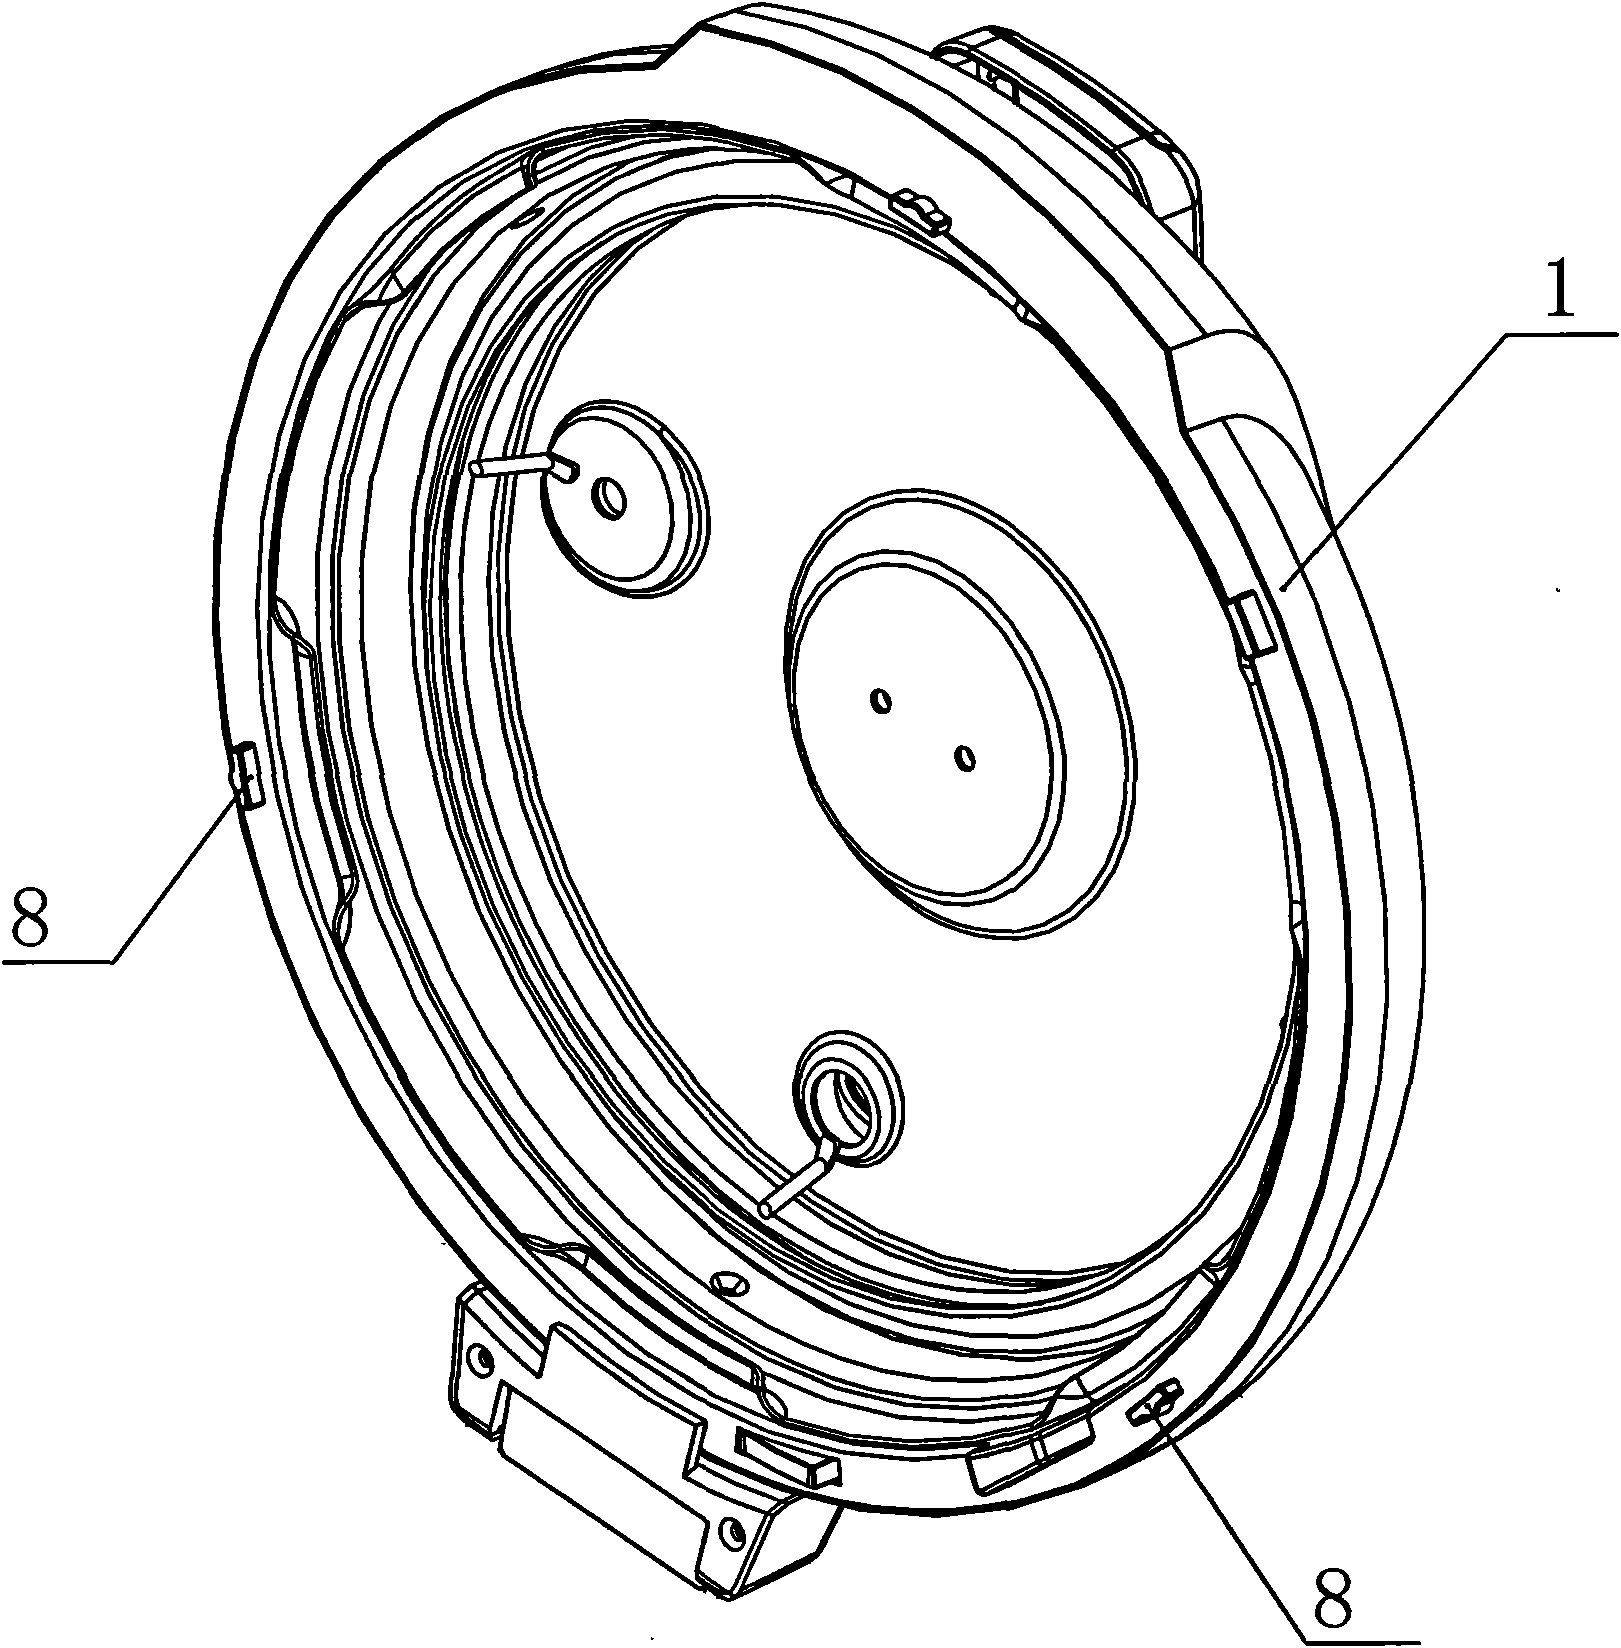 Cooker cover structure of electric pressure cooker